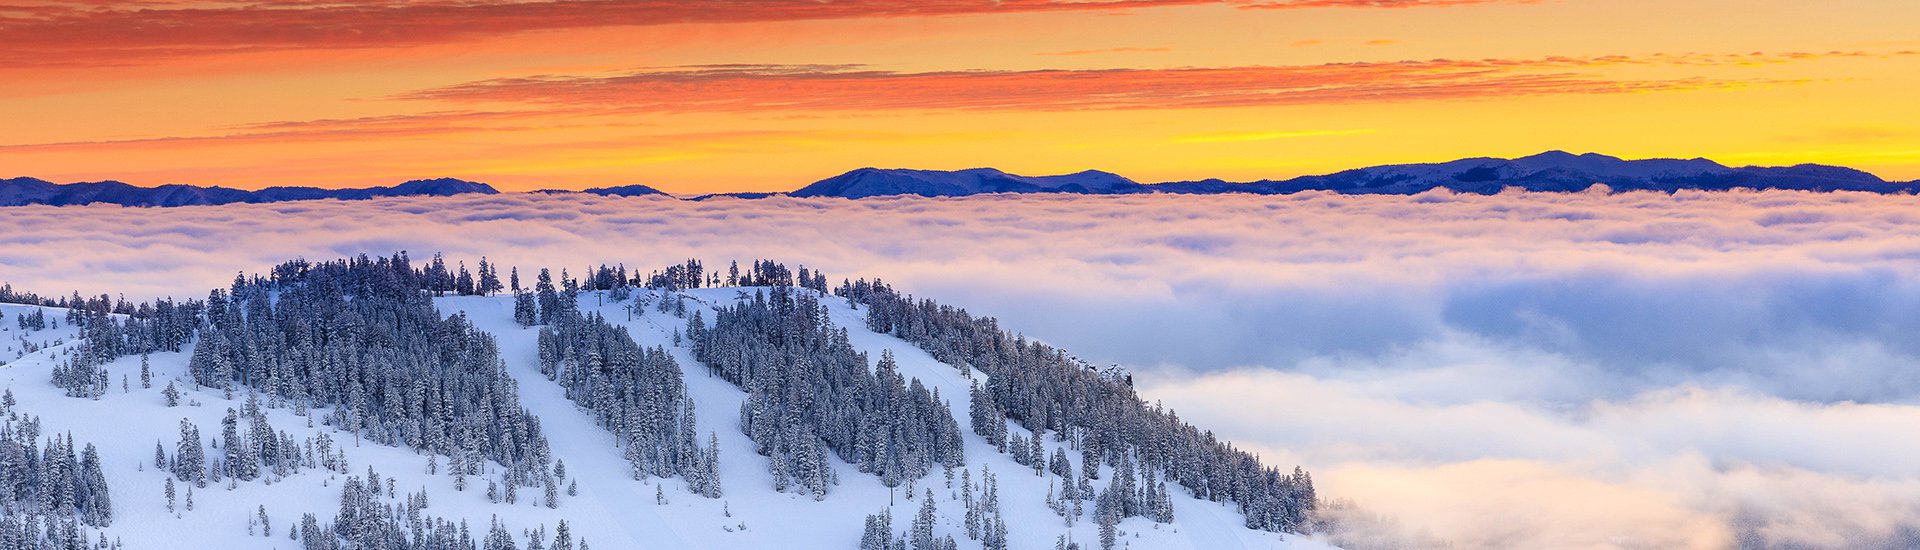 Colorful sunrise over Alpine Meadows with cloud inversion over Lake Tahoe